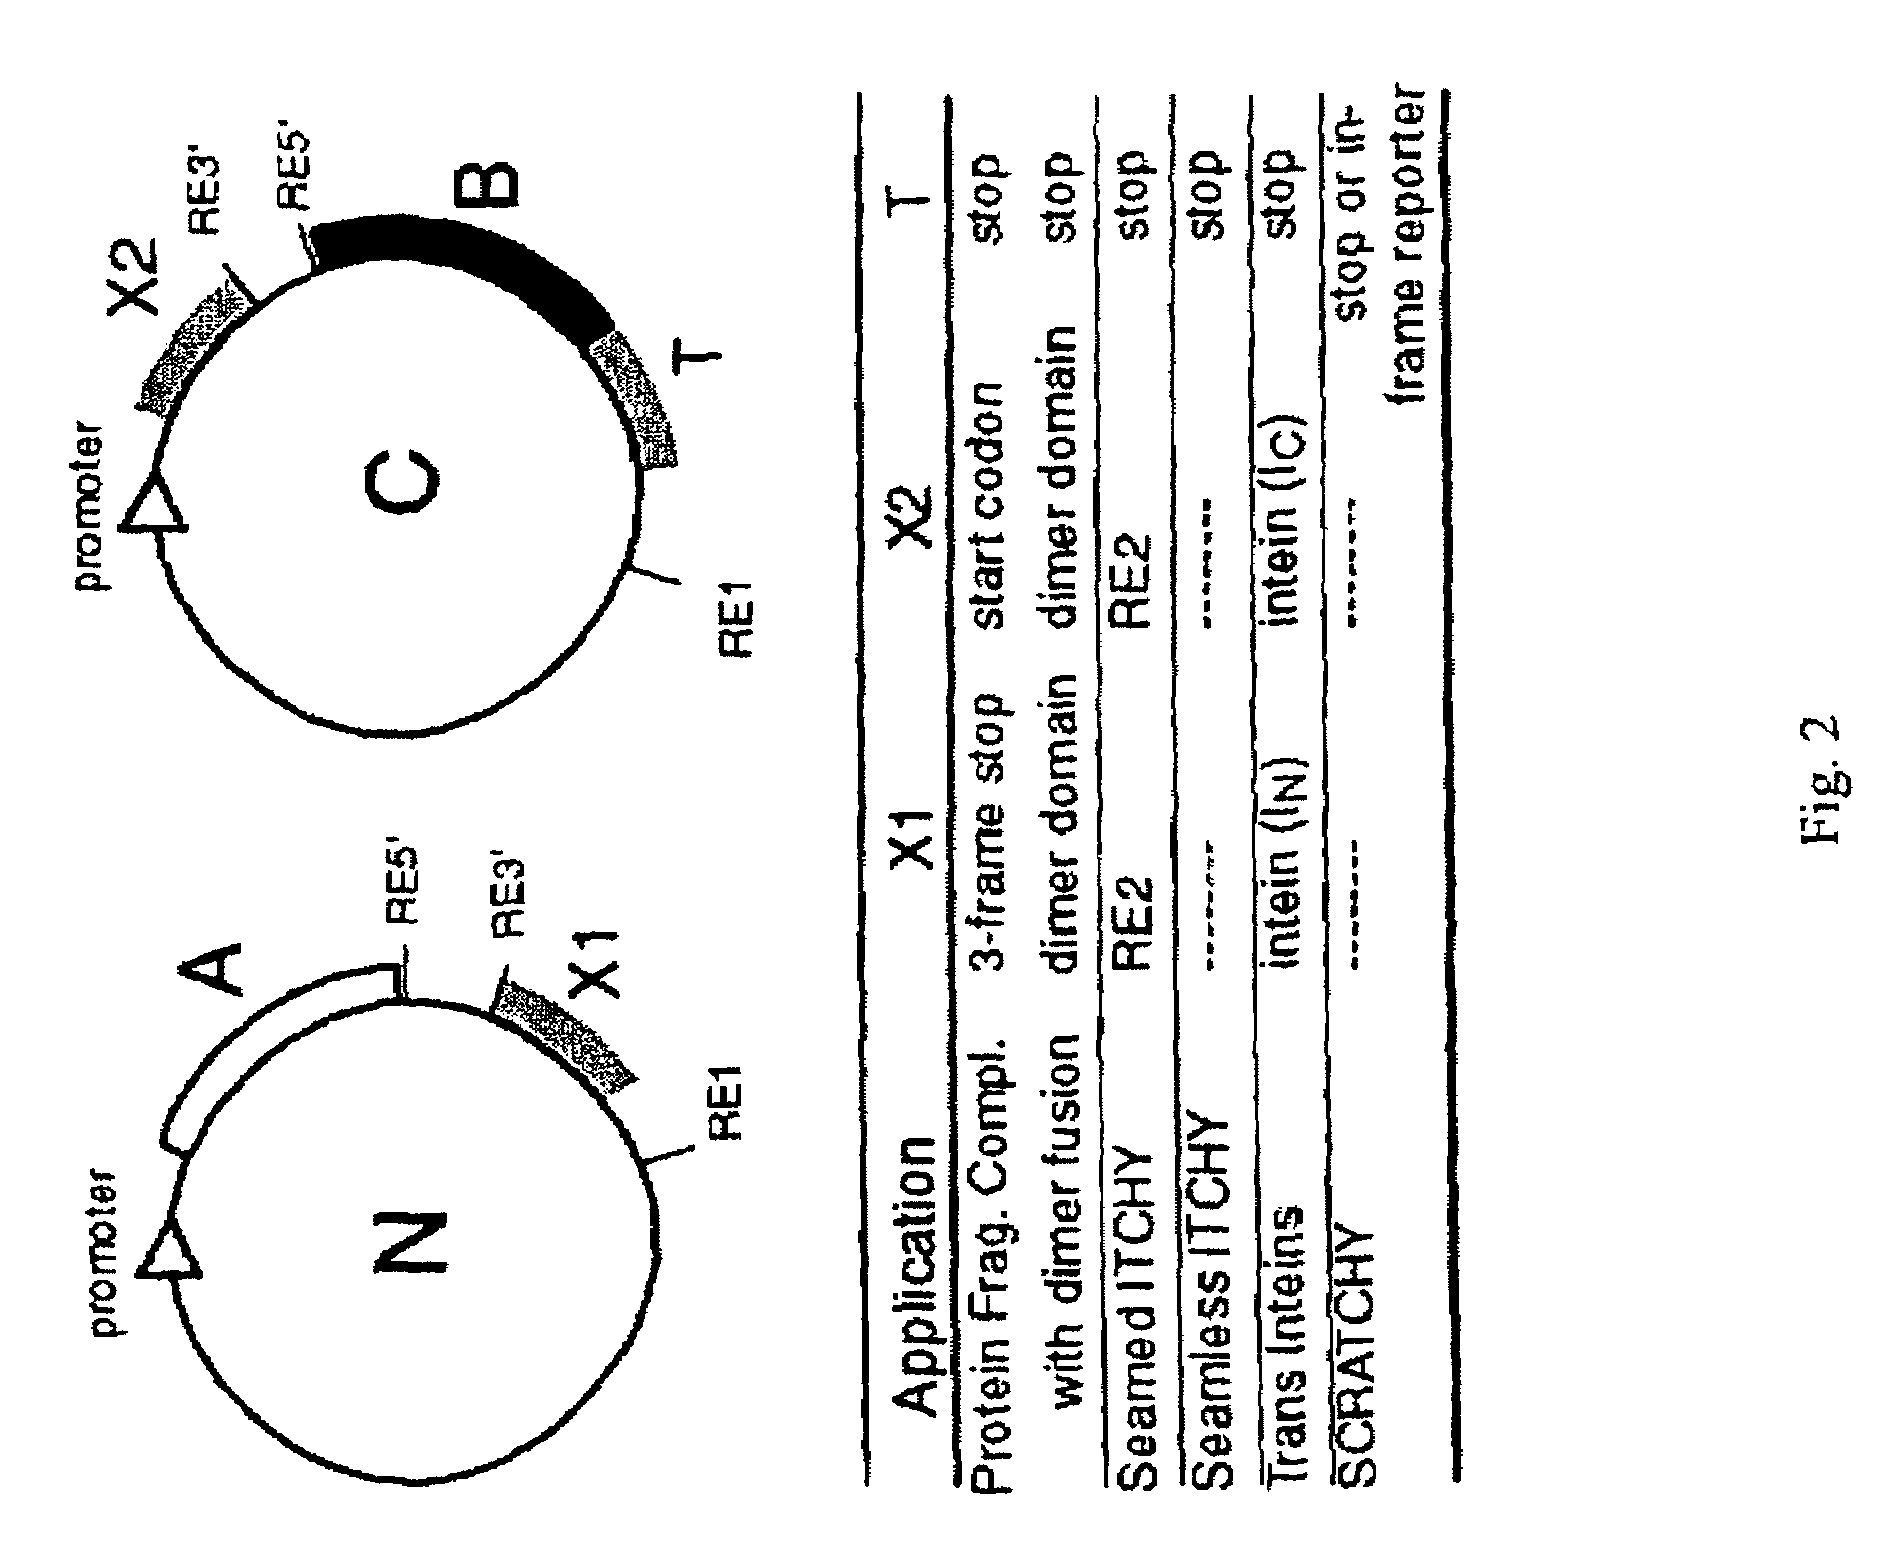 Incrementally truncated nucleic acids and methods of making same